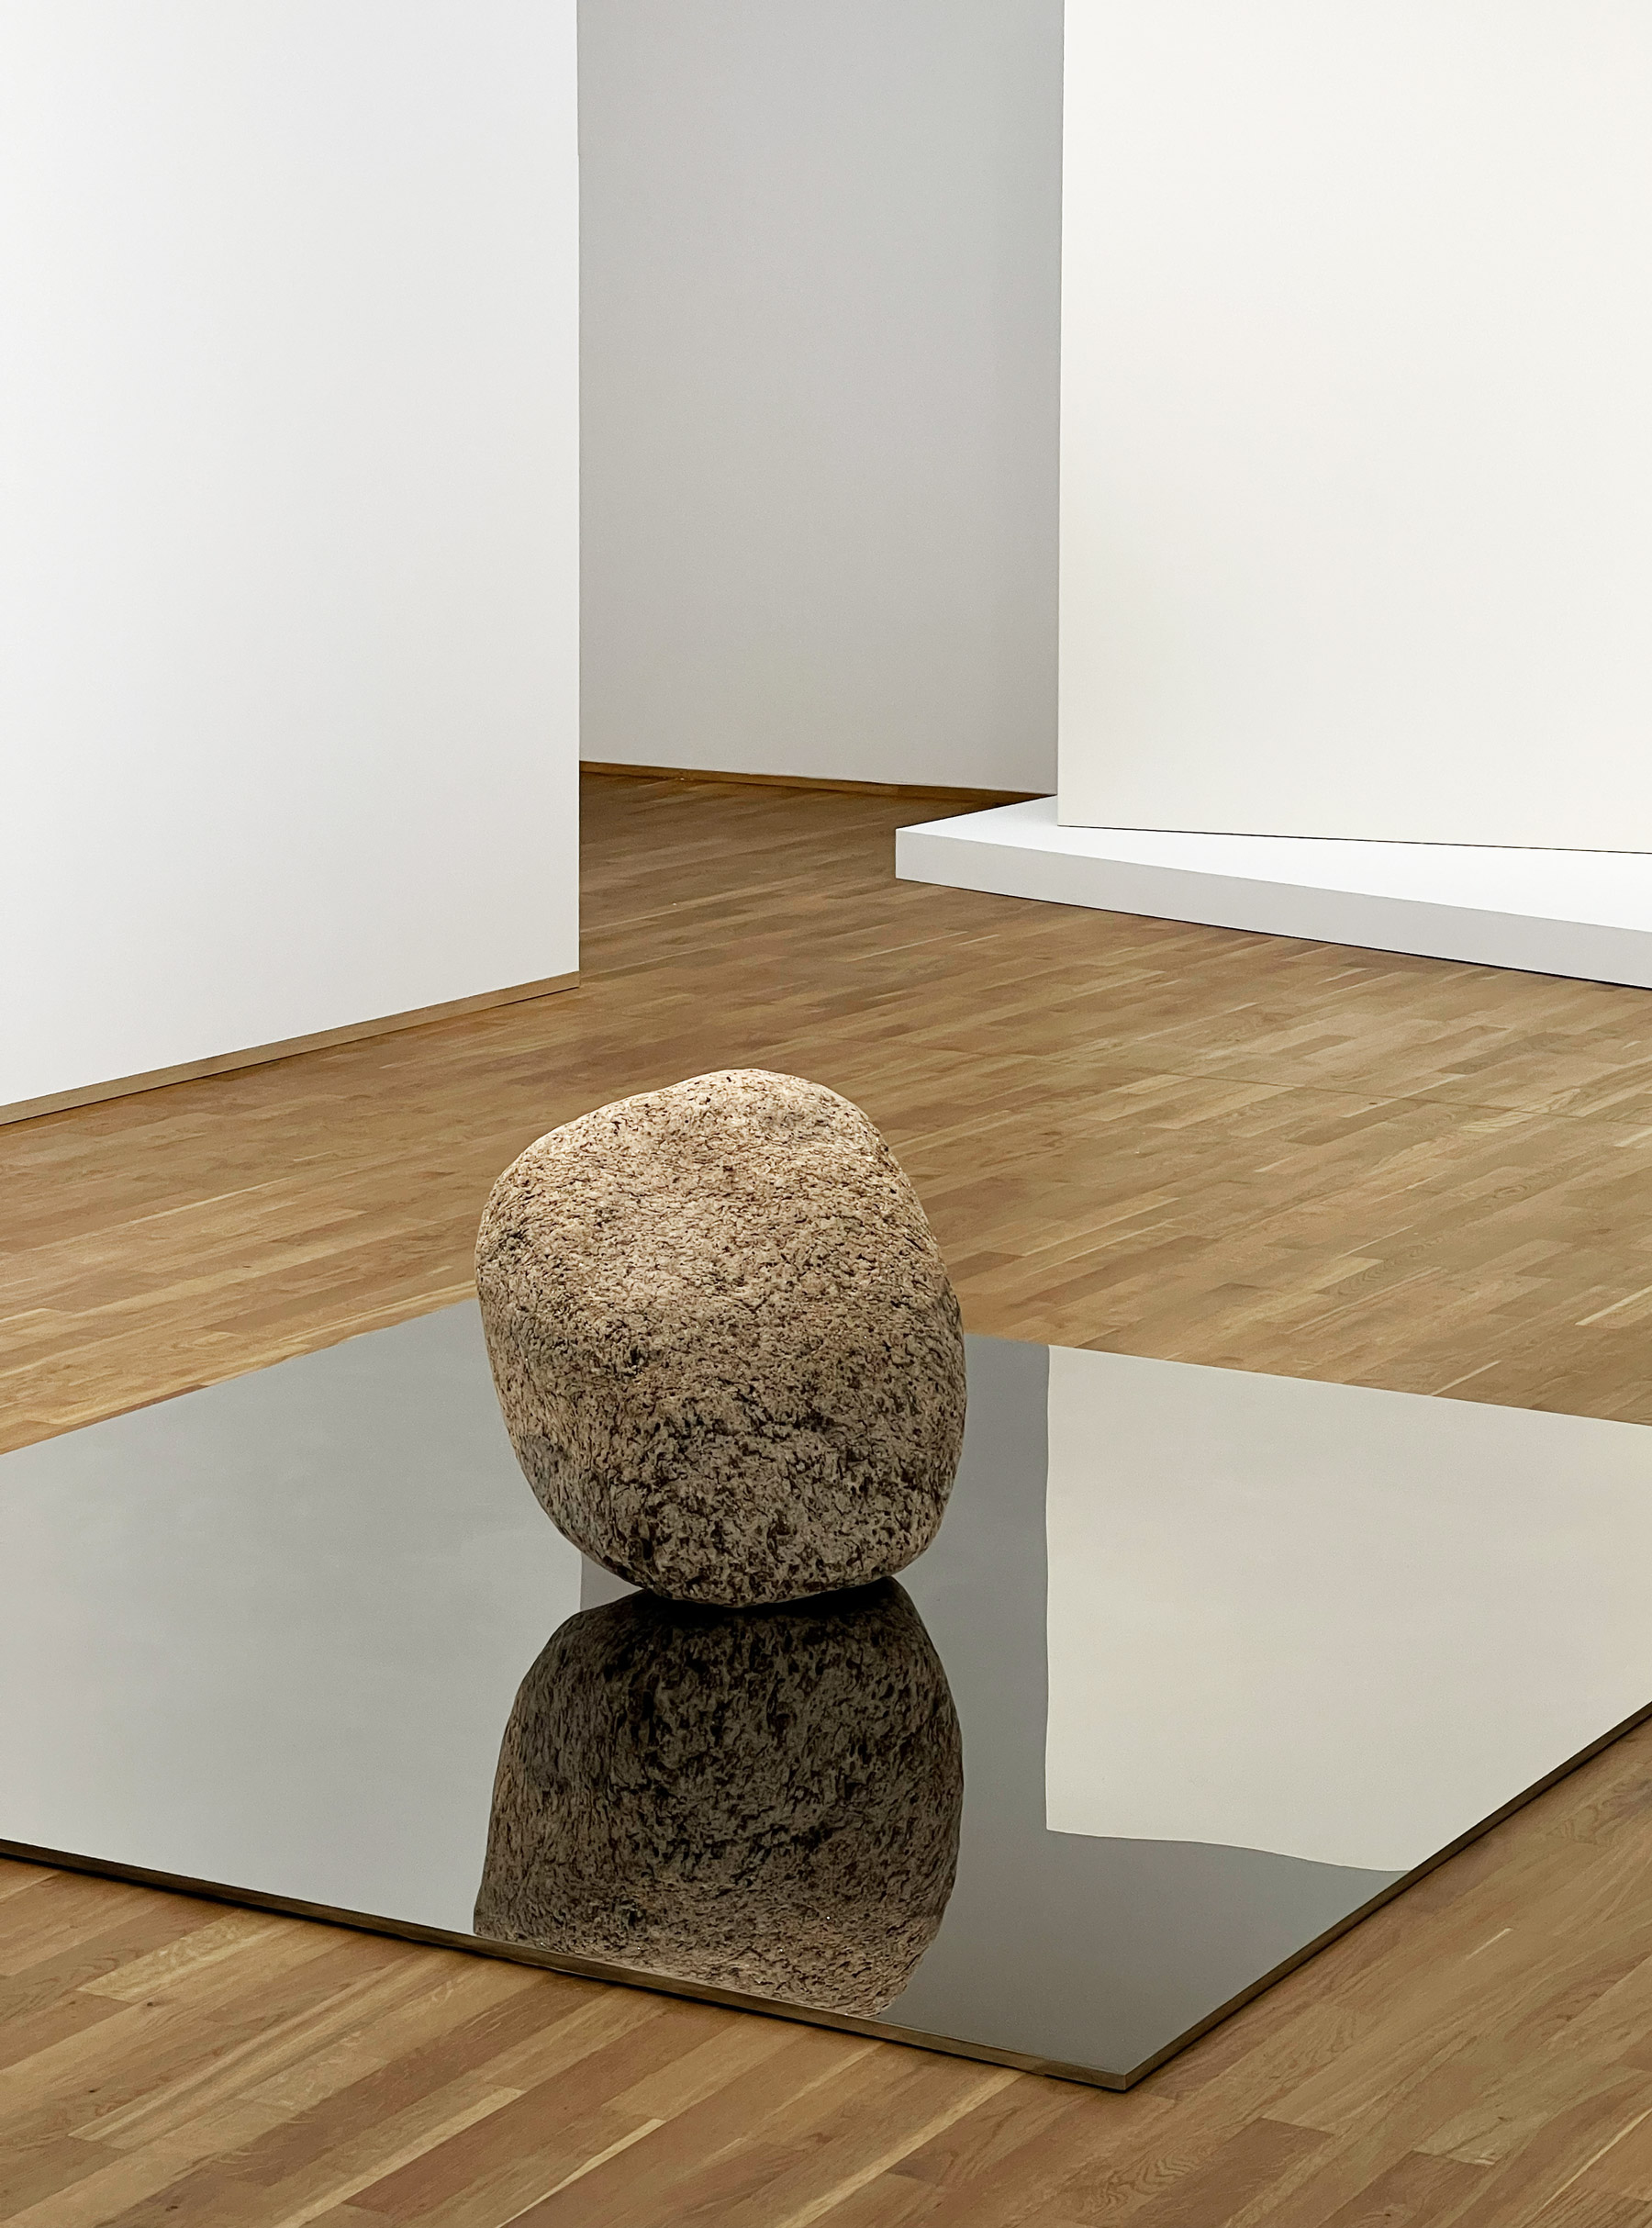 View of "Relatum - The Position 2", 2023, stone, steel, 250 x 218 x 1.5 cm, Photography: Aesence/ Sarah Dorweiler